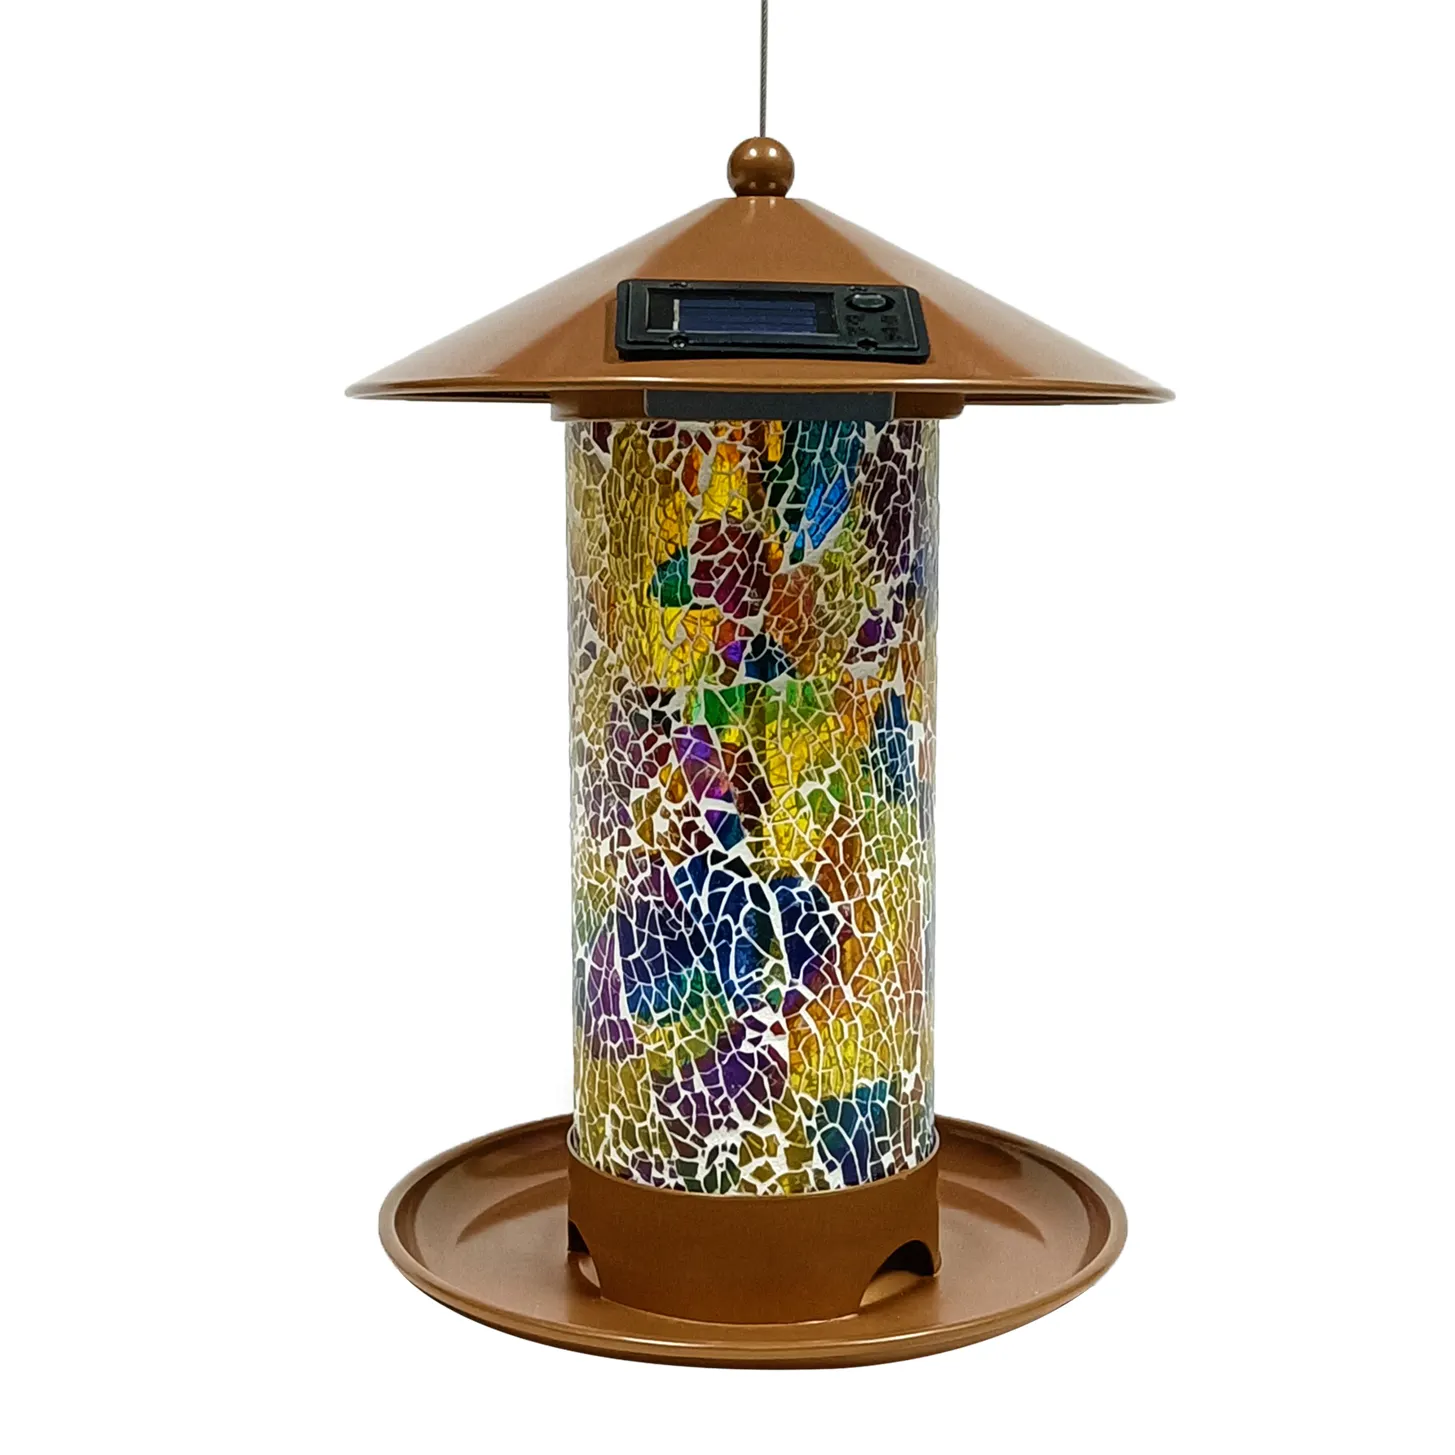 Automatic Solar Power Mosaic Glass Tube Led Light Wild Bird Feeder With Meal Lid And Tray For Outdoor Garden Hanging